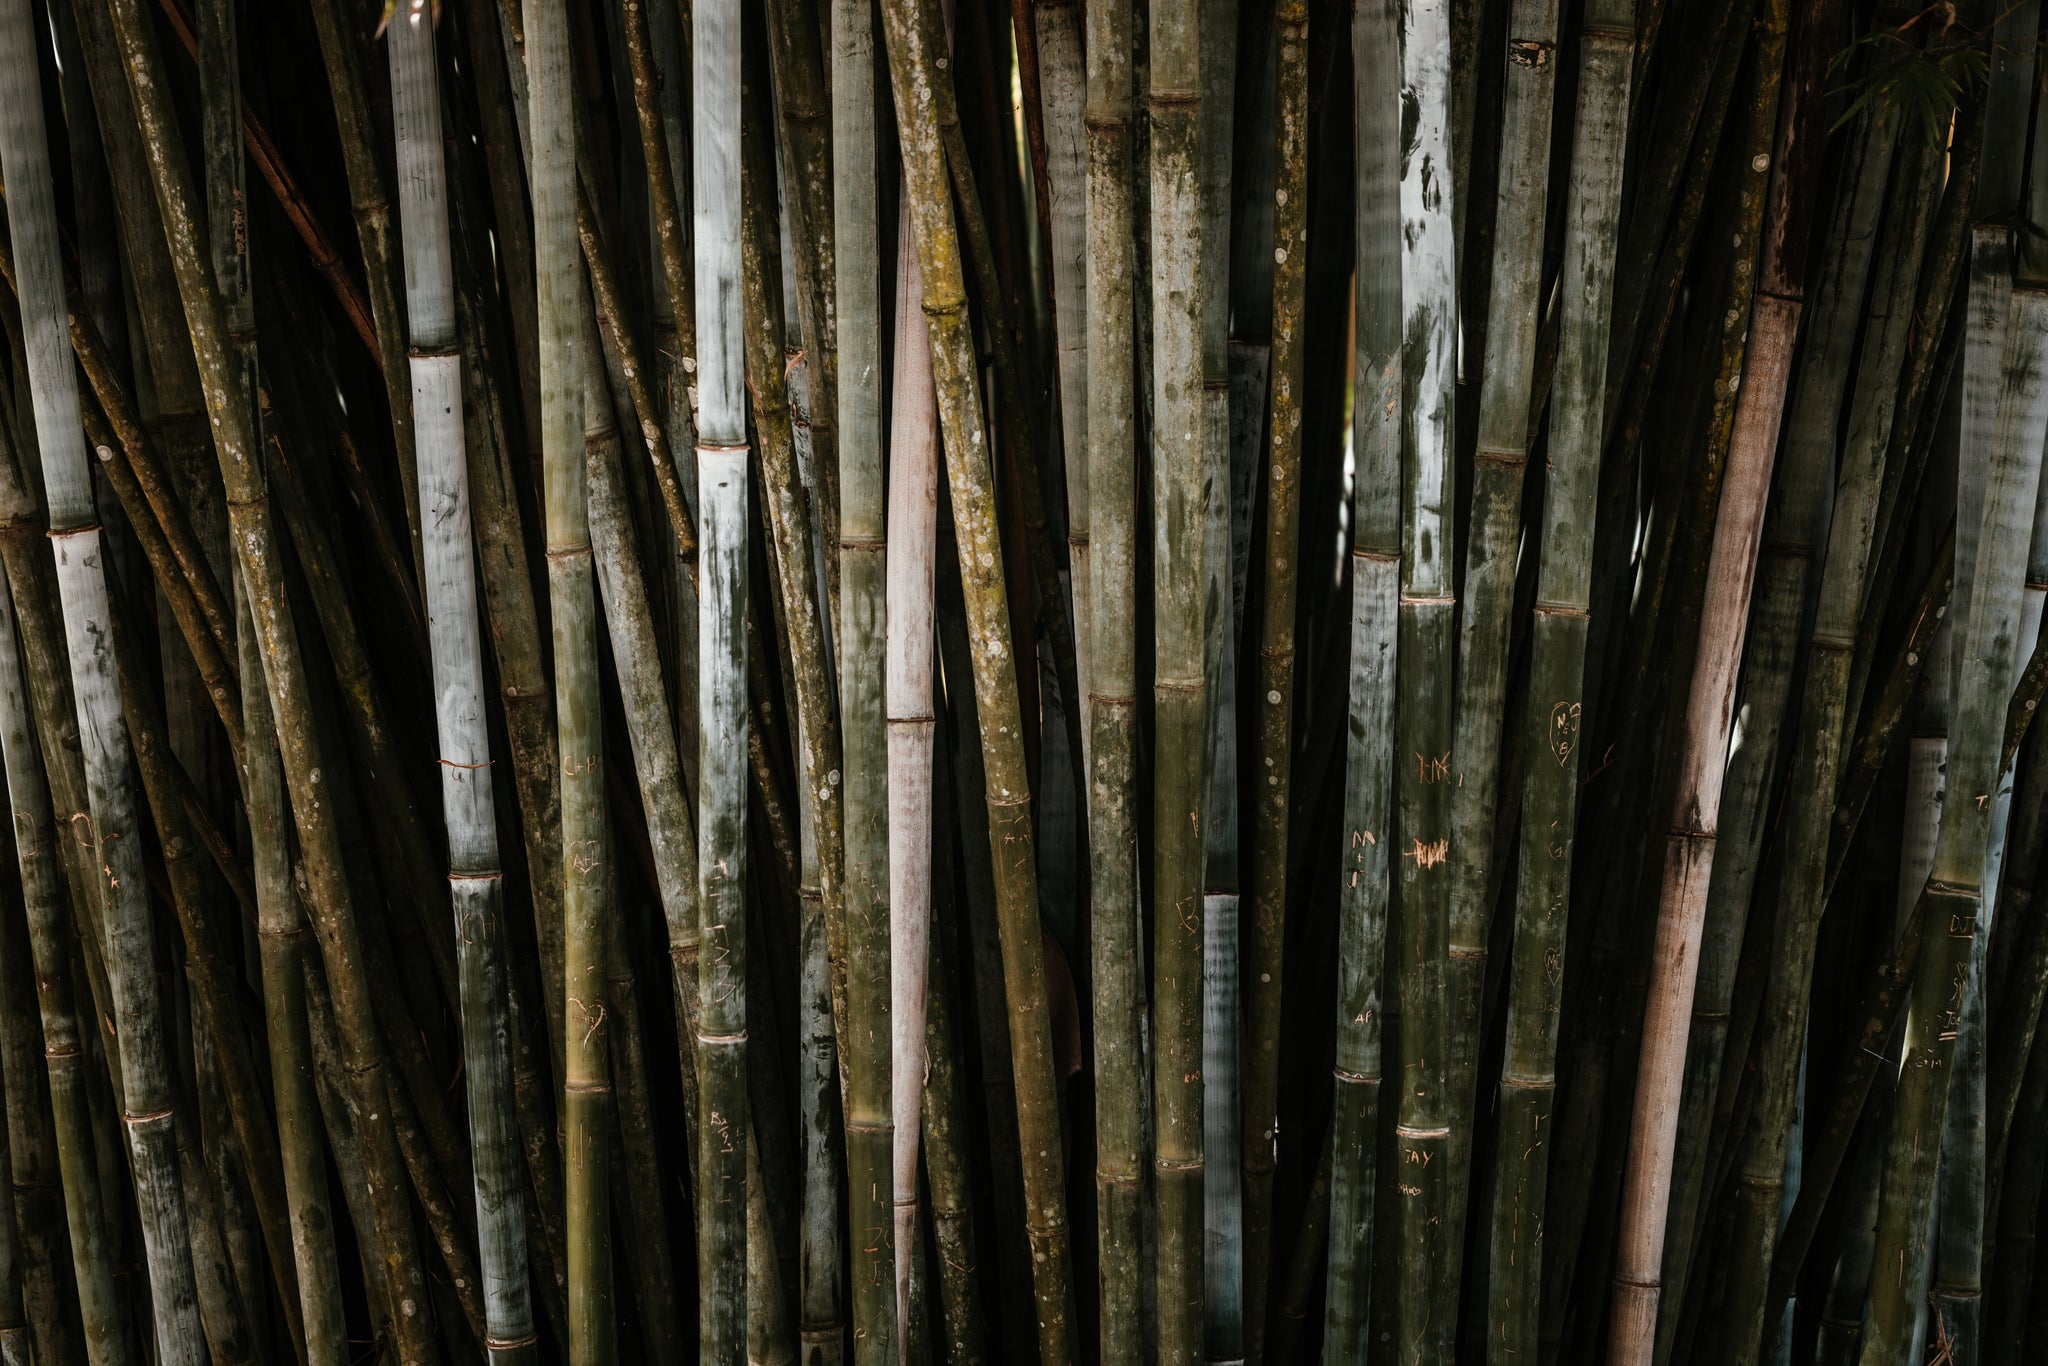 A Bamboo forest used to make bamboo sheet sets and bamboo duvet cover sets